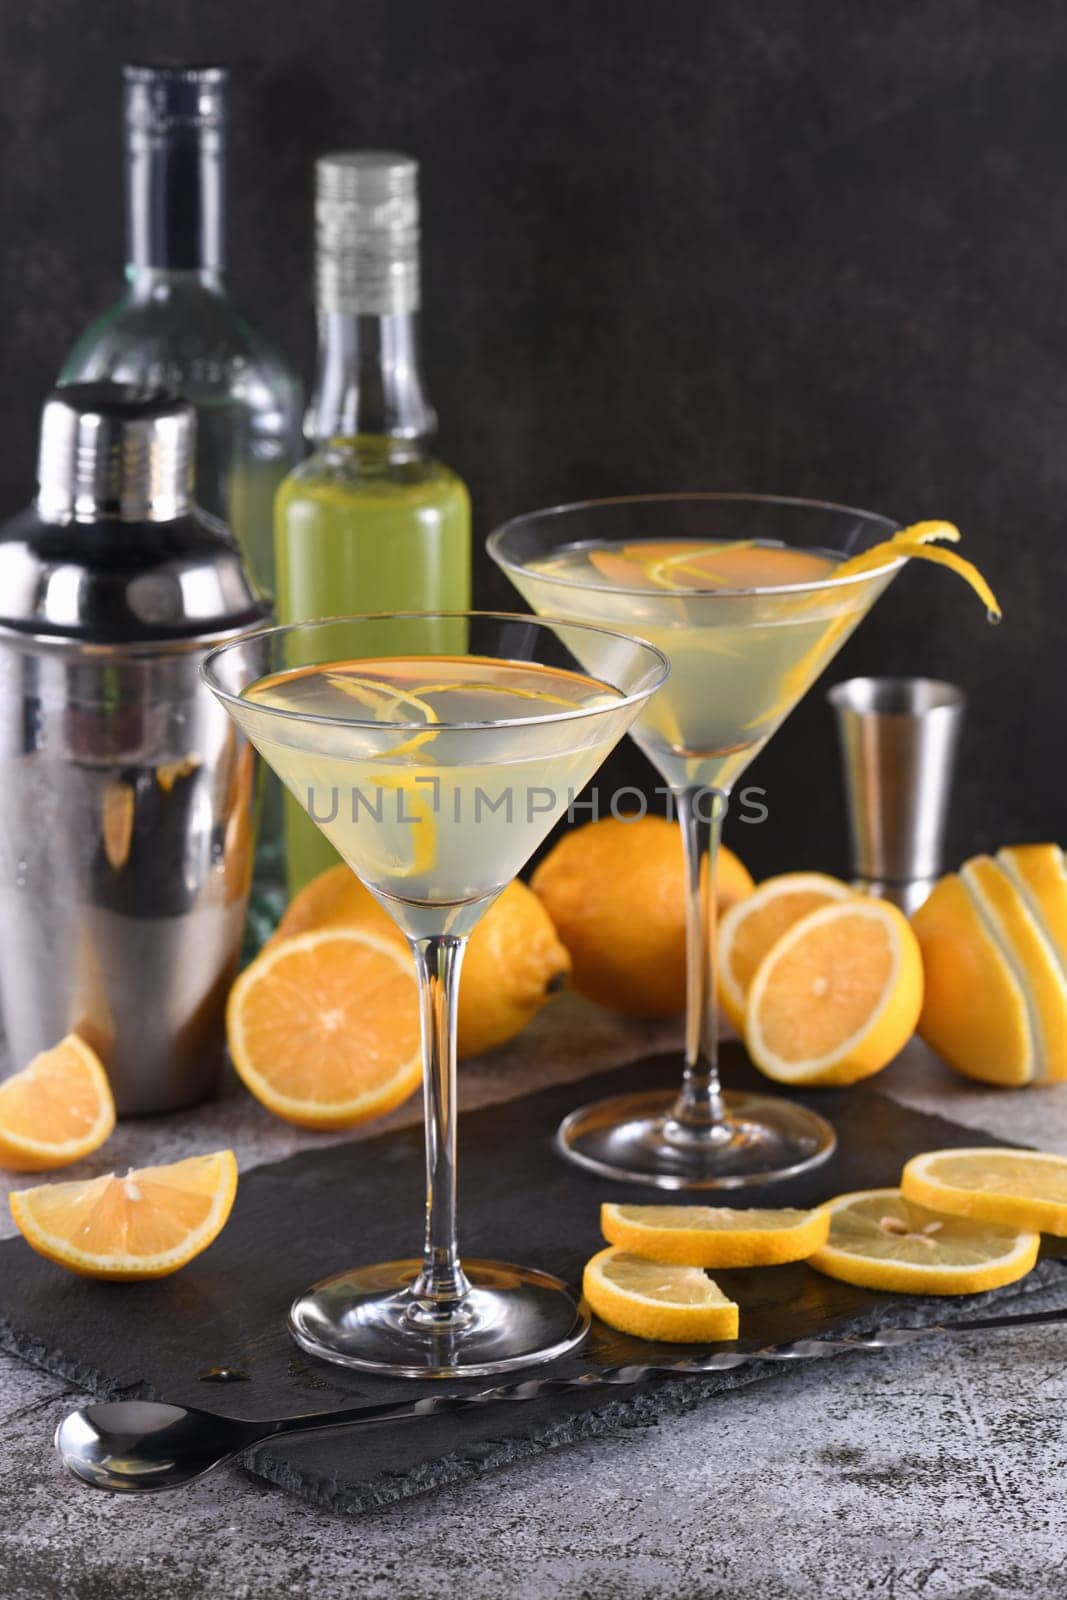 Lemon drop martini with zest by Apolonia